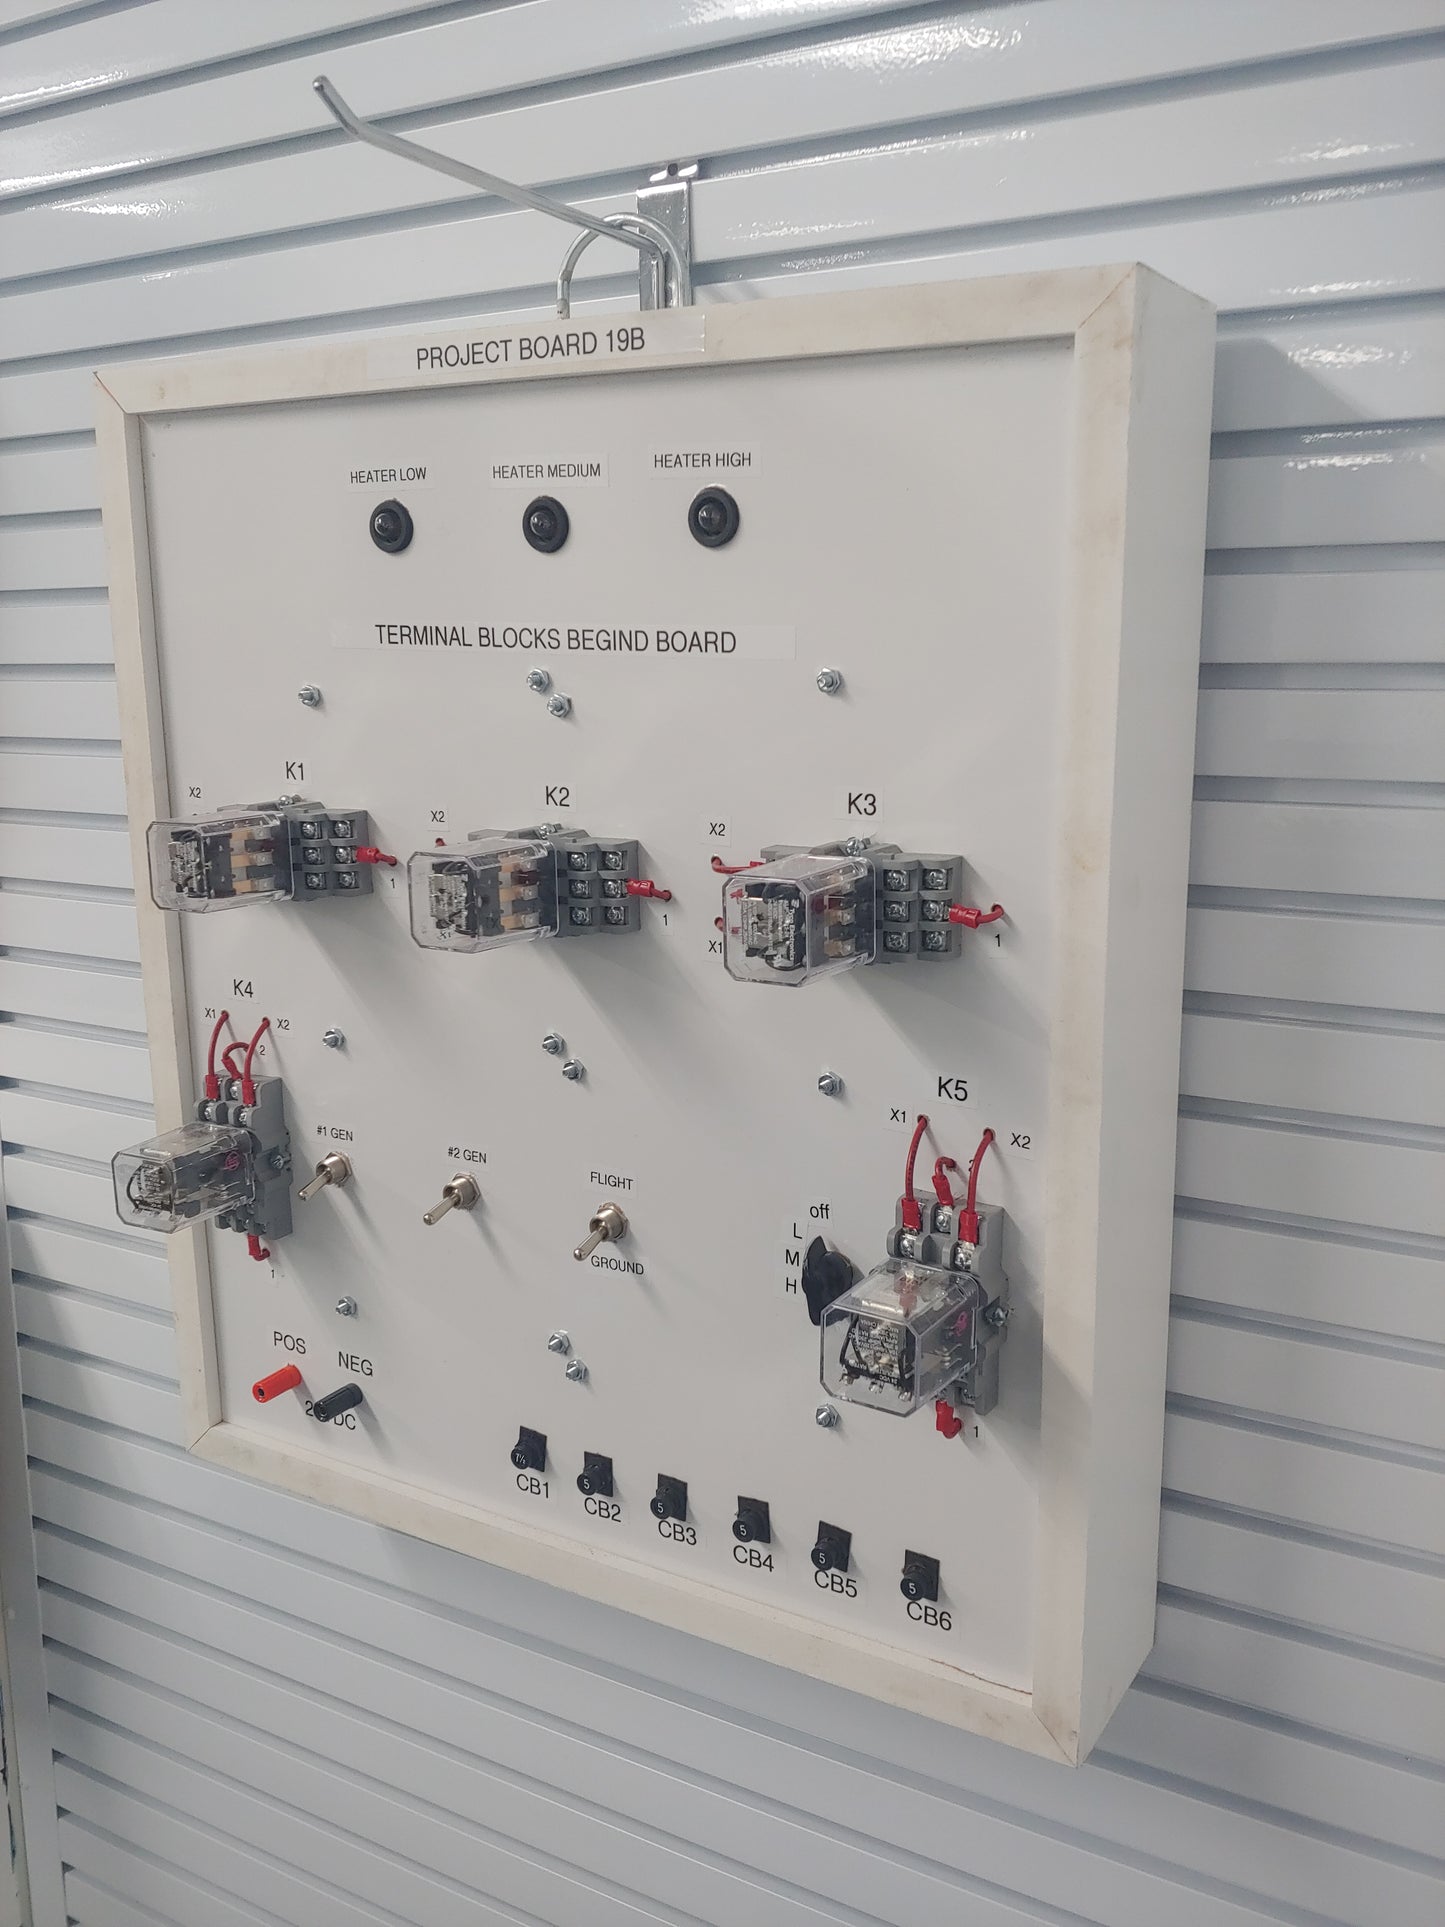 Board 17 - WR Cabin Heating System (with rotary switch)